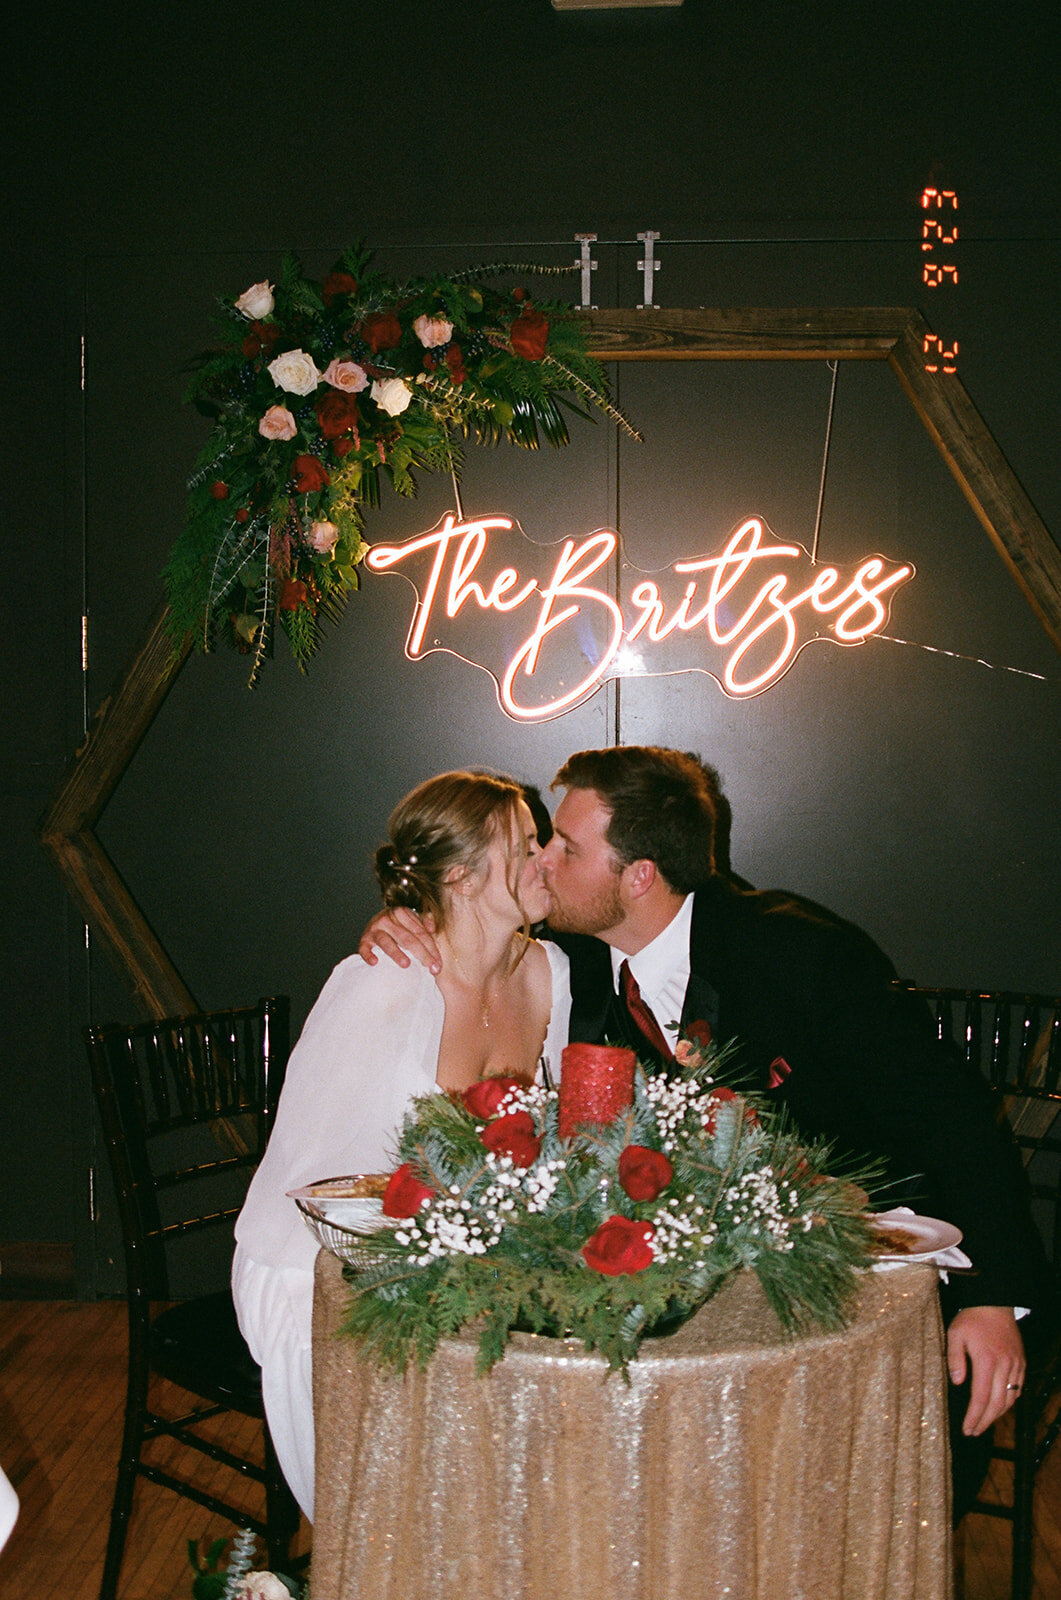 Film photo of a bride and groom kissing under a neon light.